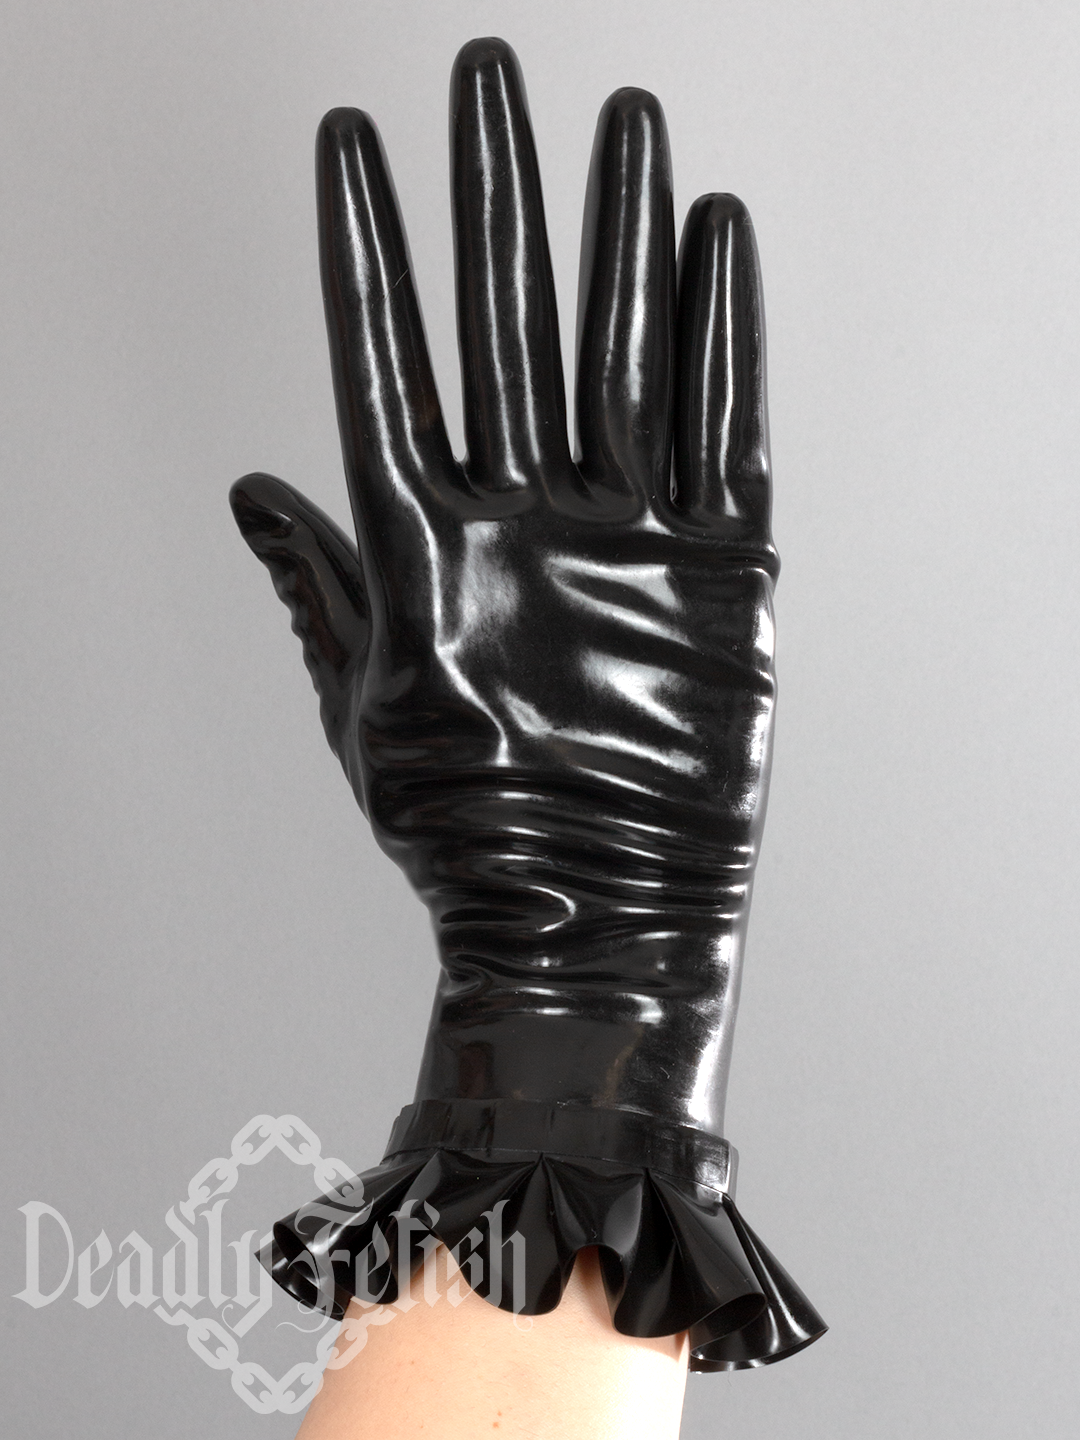 Deadly Fetish Made-To-Order Latex: Gloves With Ruffle Trim